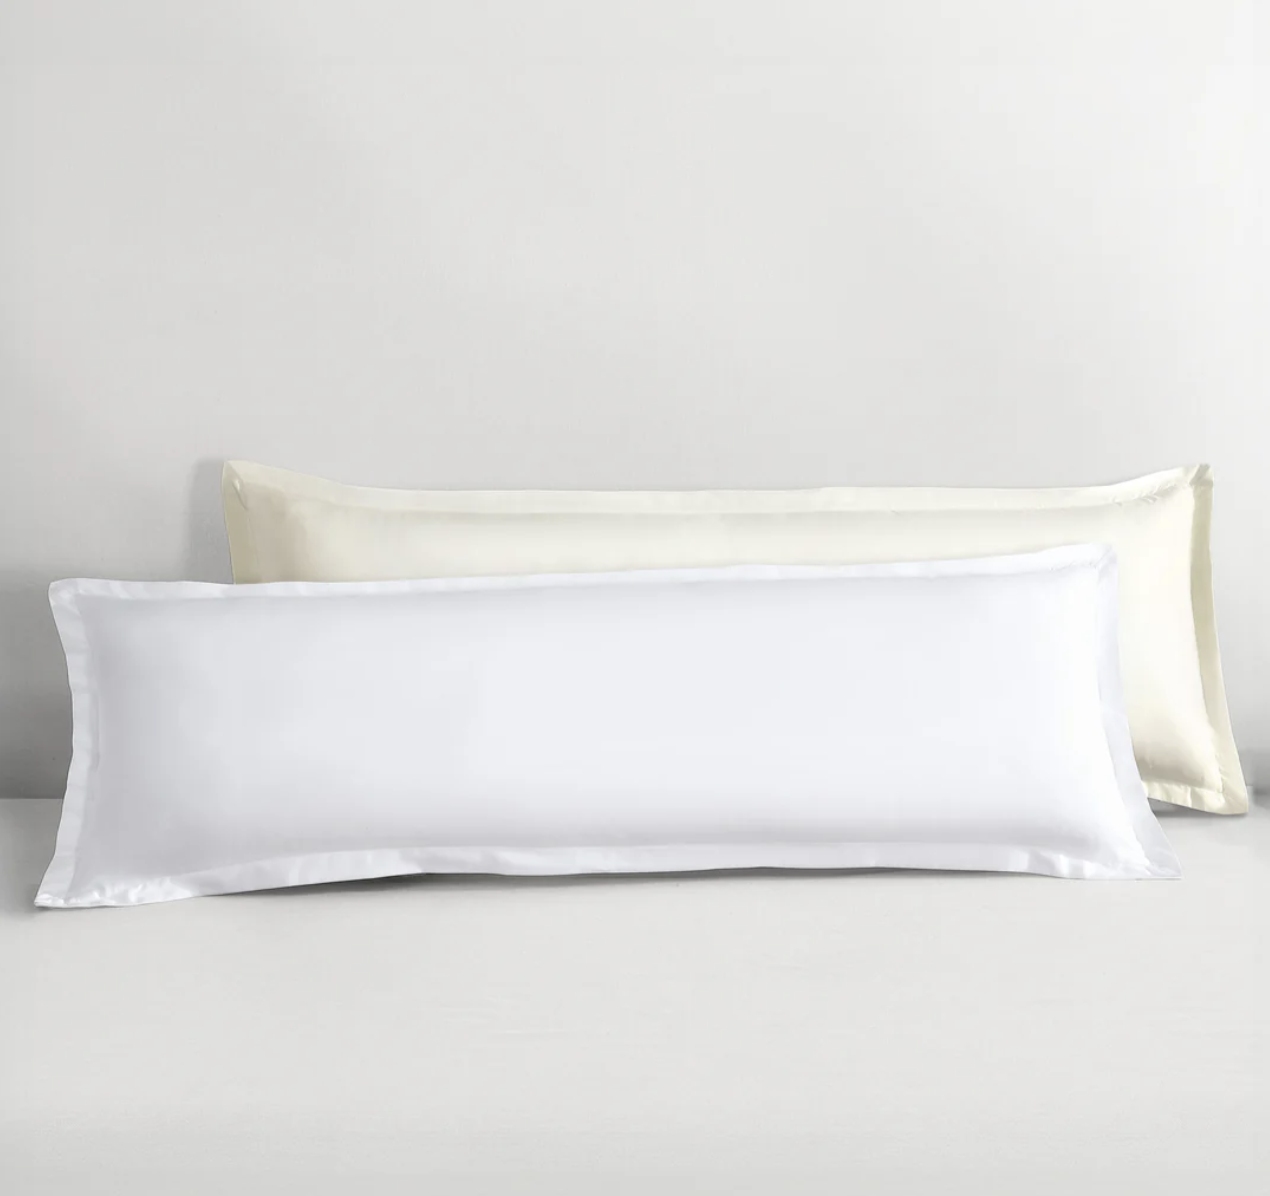 Pure Parima Introduces New Ultra Sateen Body Pillows: The Ultimate in Luxury and Comfort